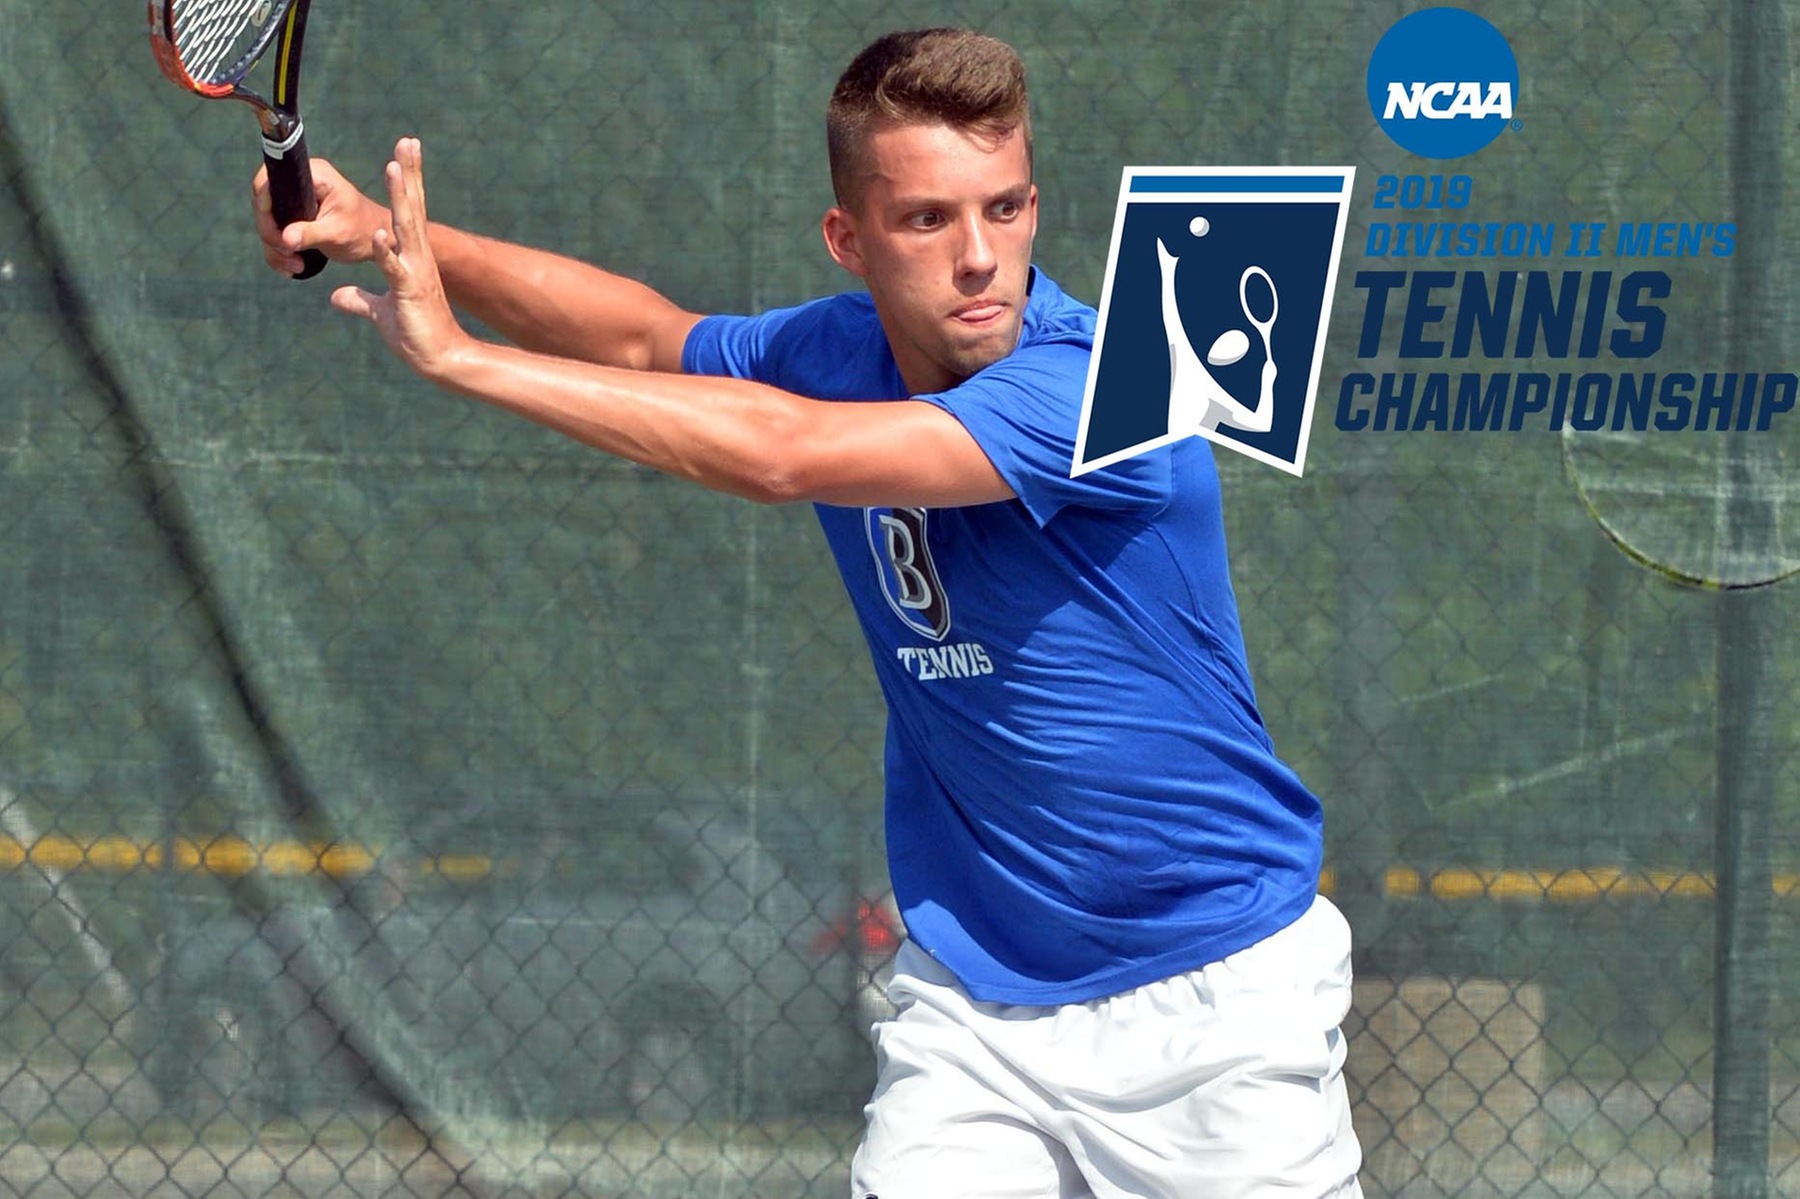  Bentley Selected to NCAA Men’s Tennis Championship, Will Play Chestnut Hill on Saturday